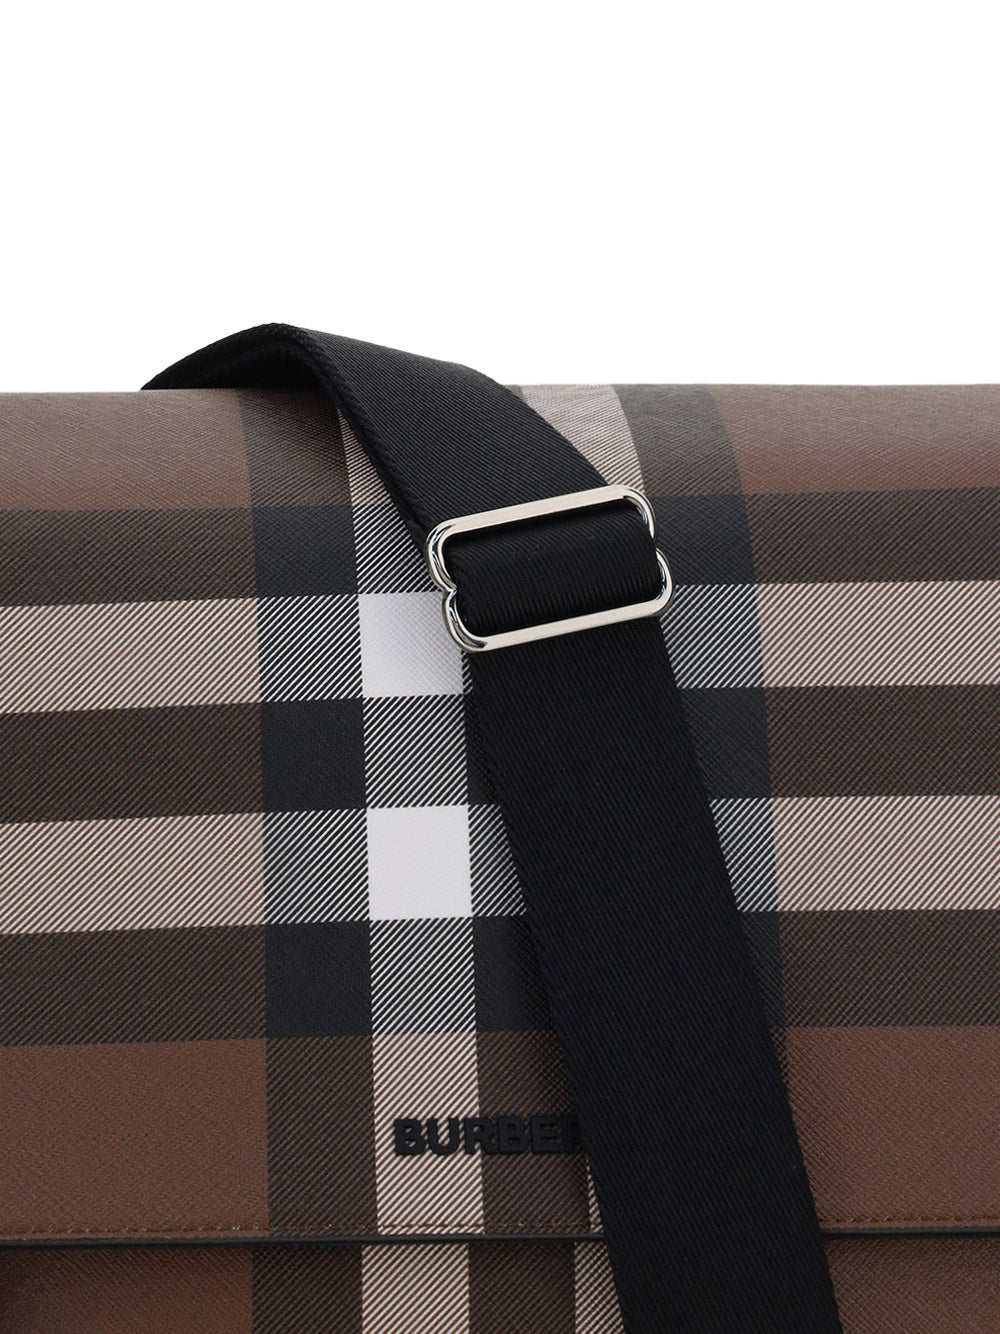 Burberry Men's Exaggerated Check Leather Tote